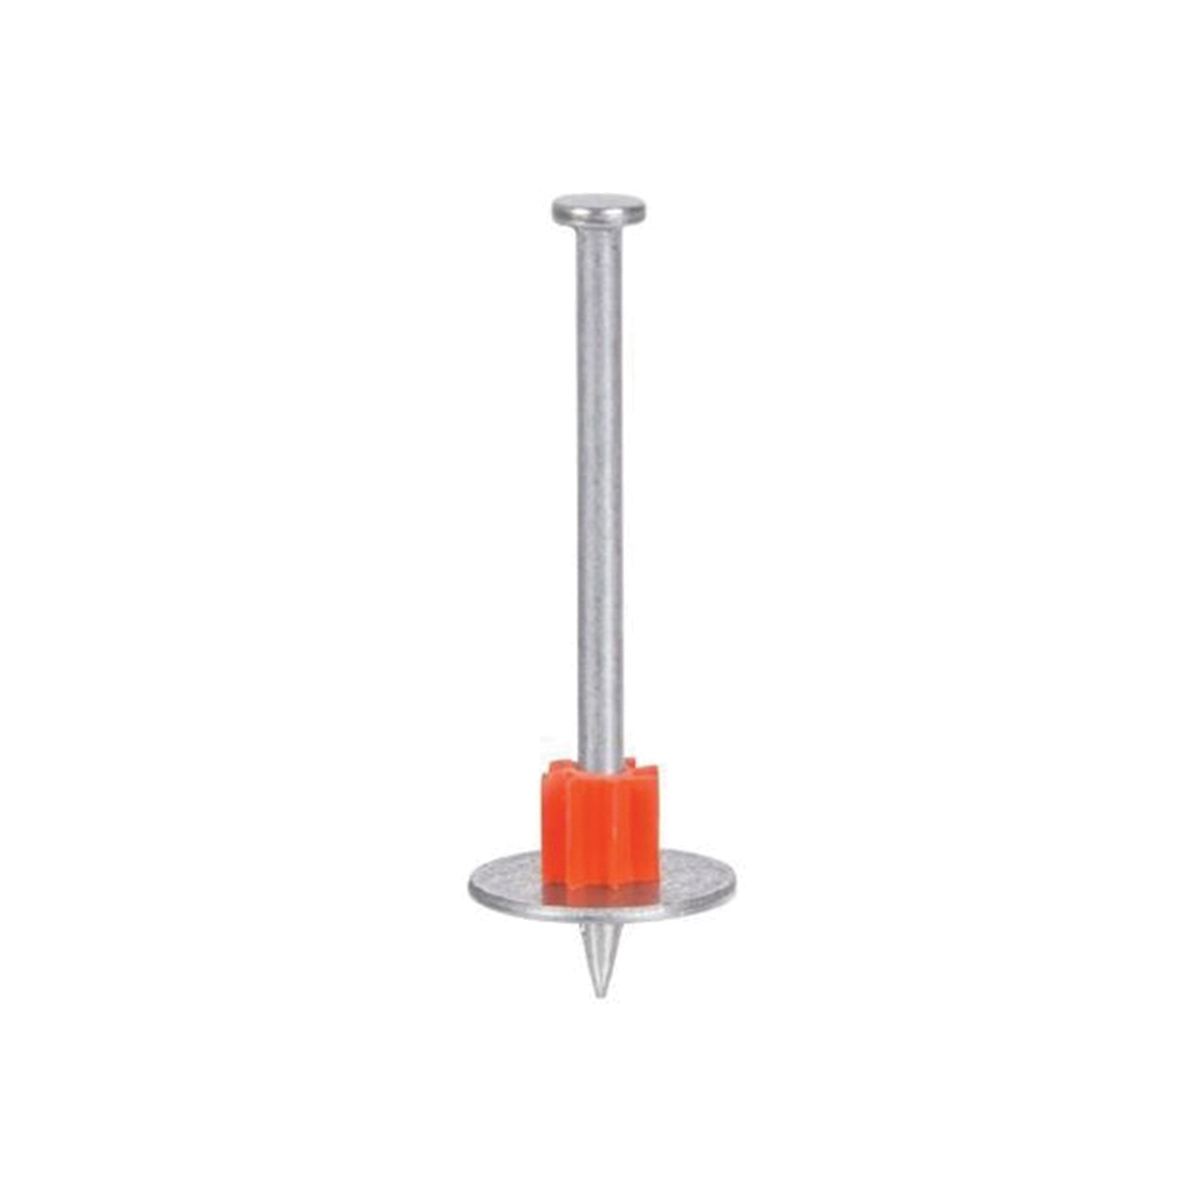 WP300 Hammer Pin with Square Washer, 3 in L, Galvanized